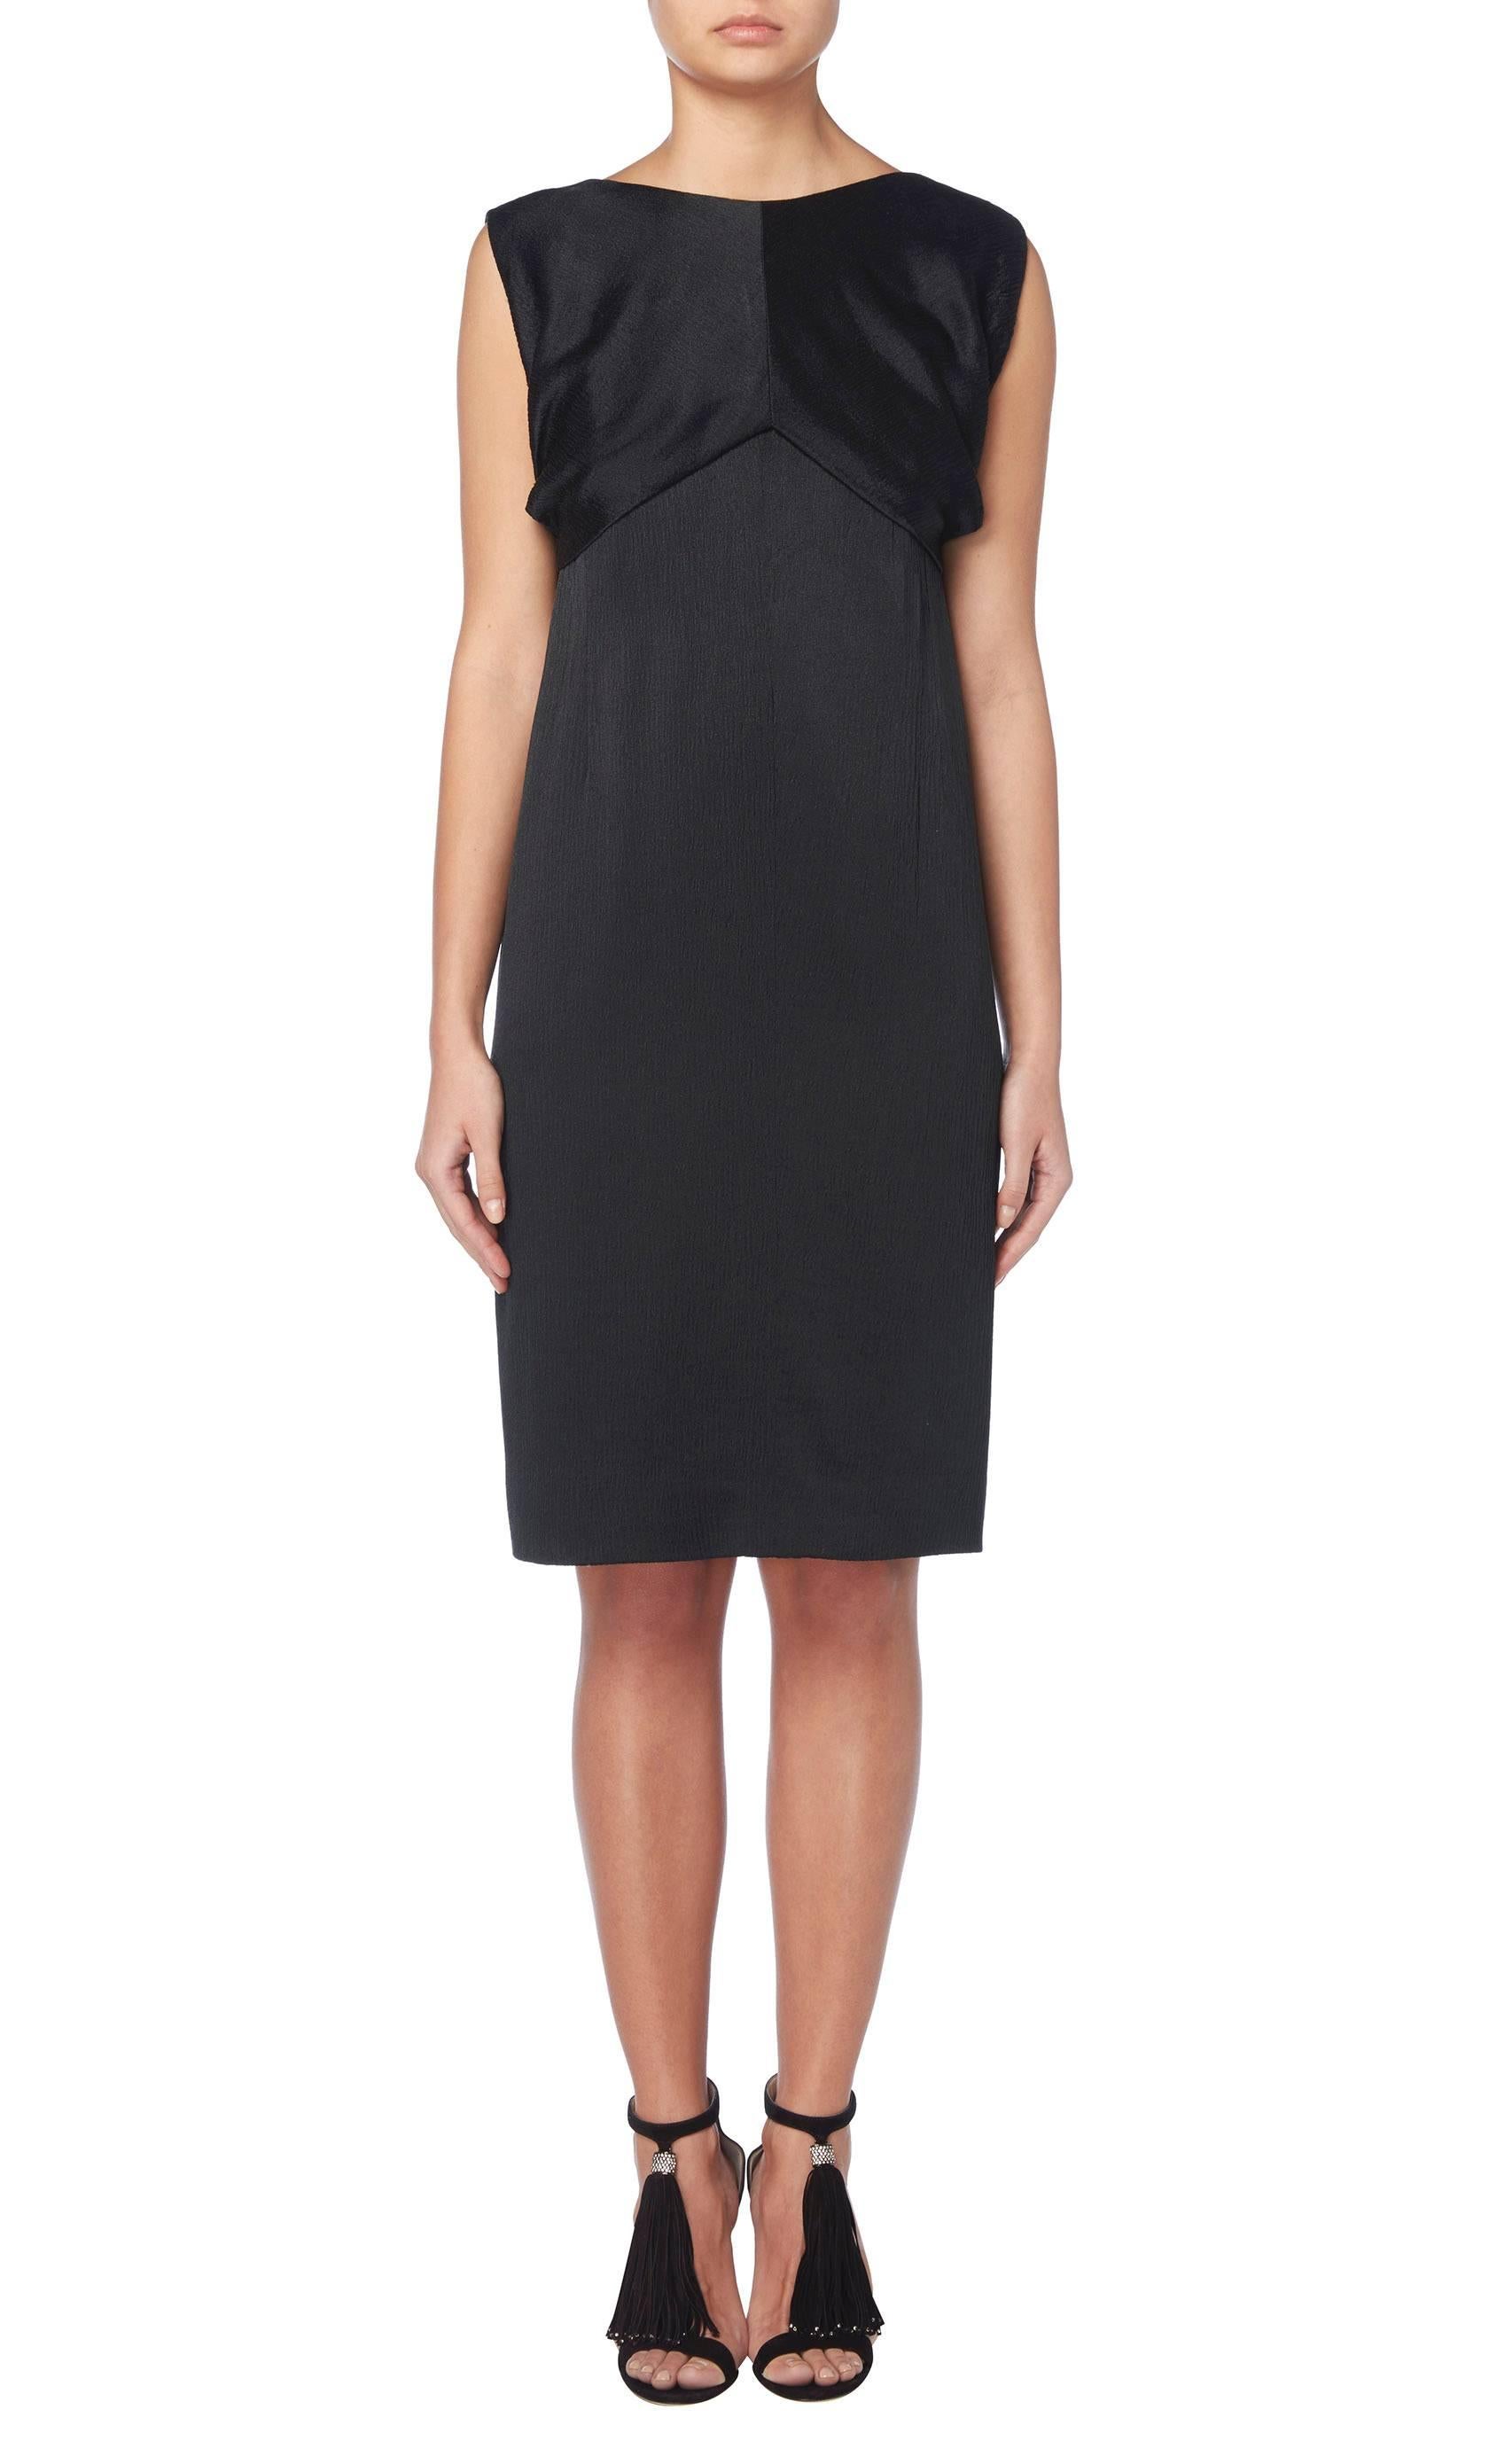 This stunning and chic haute couture dress by Balenciaga himself, is constructed in fine black matelassé silk. Featuring the original boned internal corset and silk liner this is an exquisitely constructed dress, prefect for dinners, cocktails and